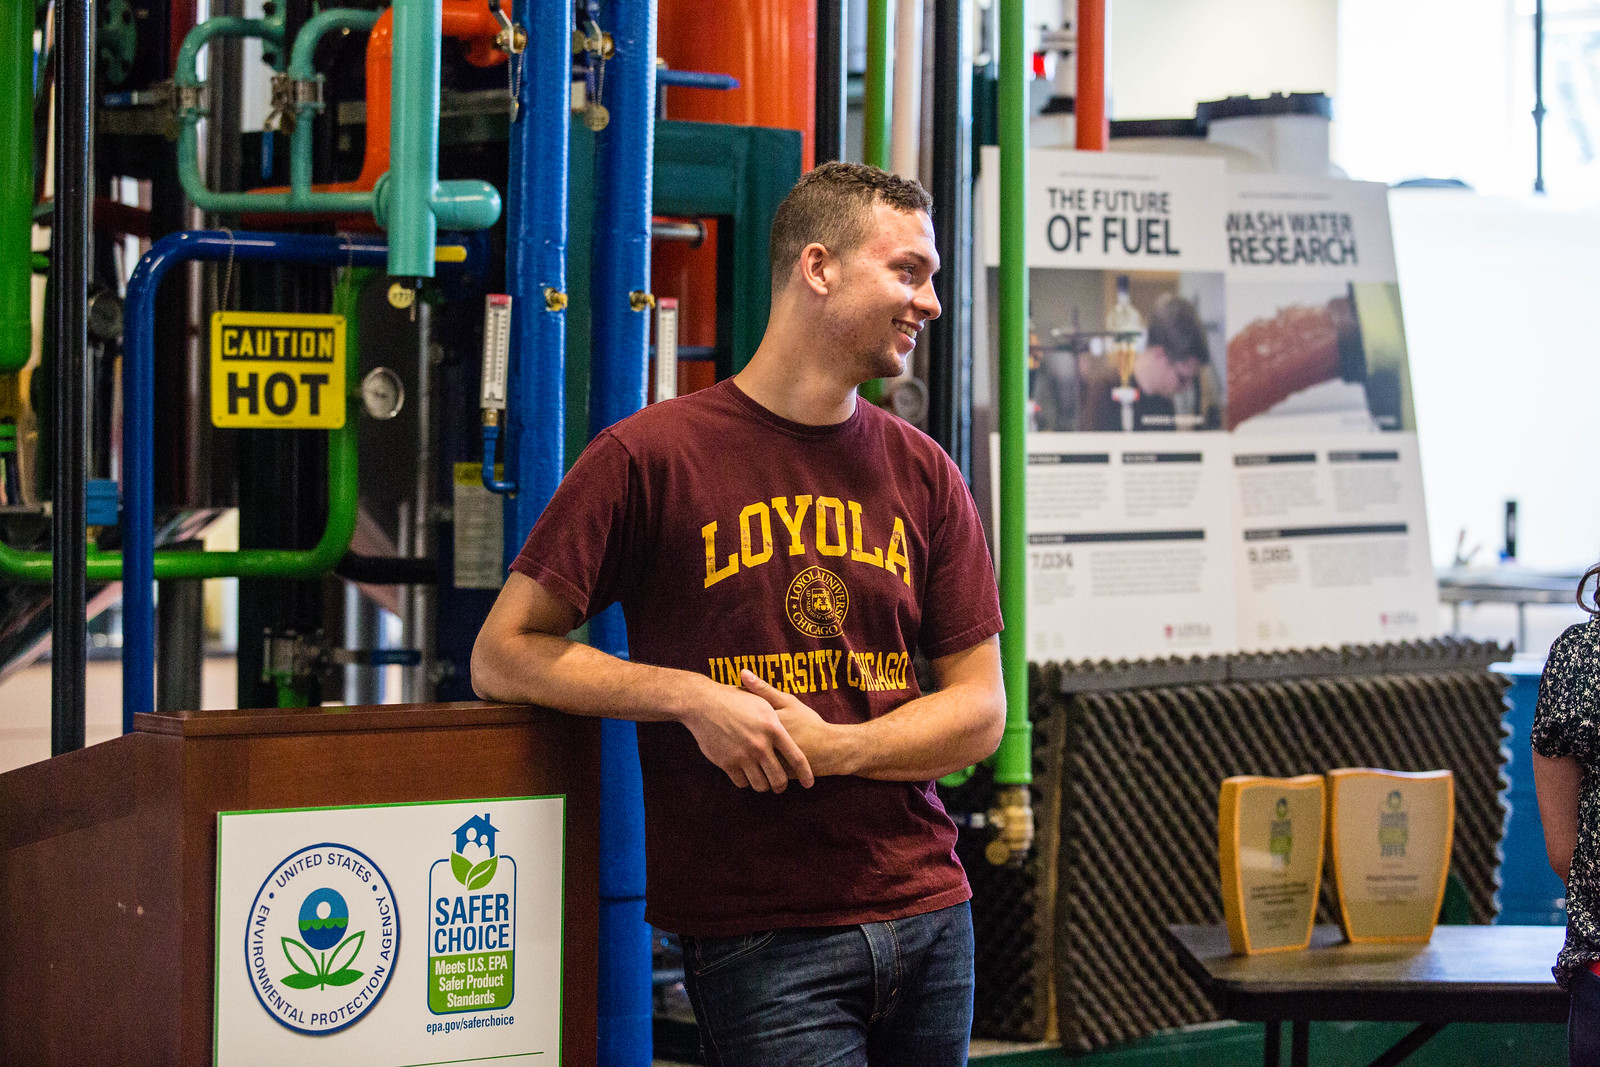 Loyola Searle Biodiesel Lab recognized as 2015 Safer Choice Partner of the Year Award Winner by the Environmental Protection Agency